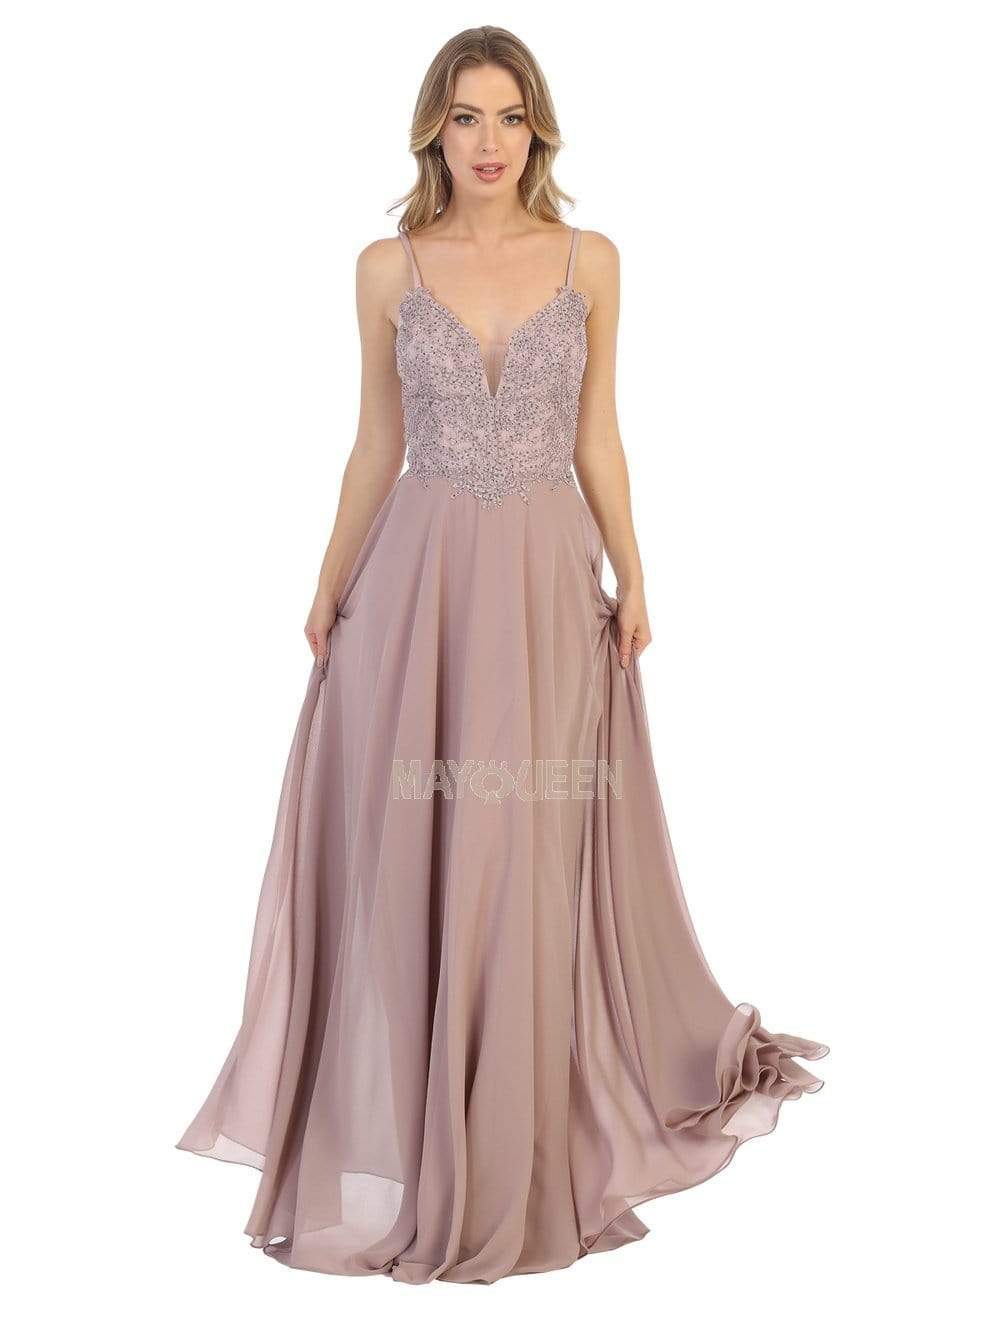 May Queen - MQ1750 Embroidered Plunging V-neck A-line Dress Prom Dresses 4 / Mauve